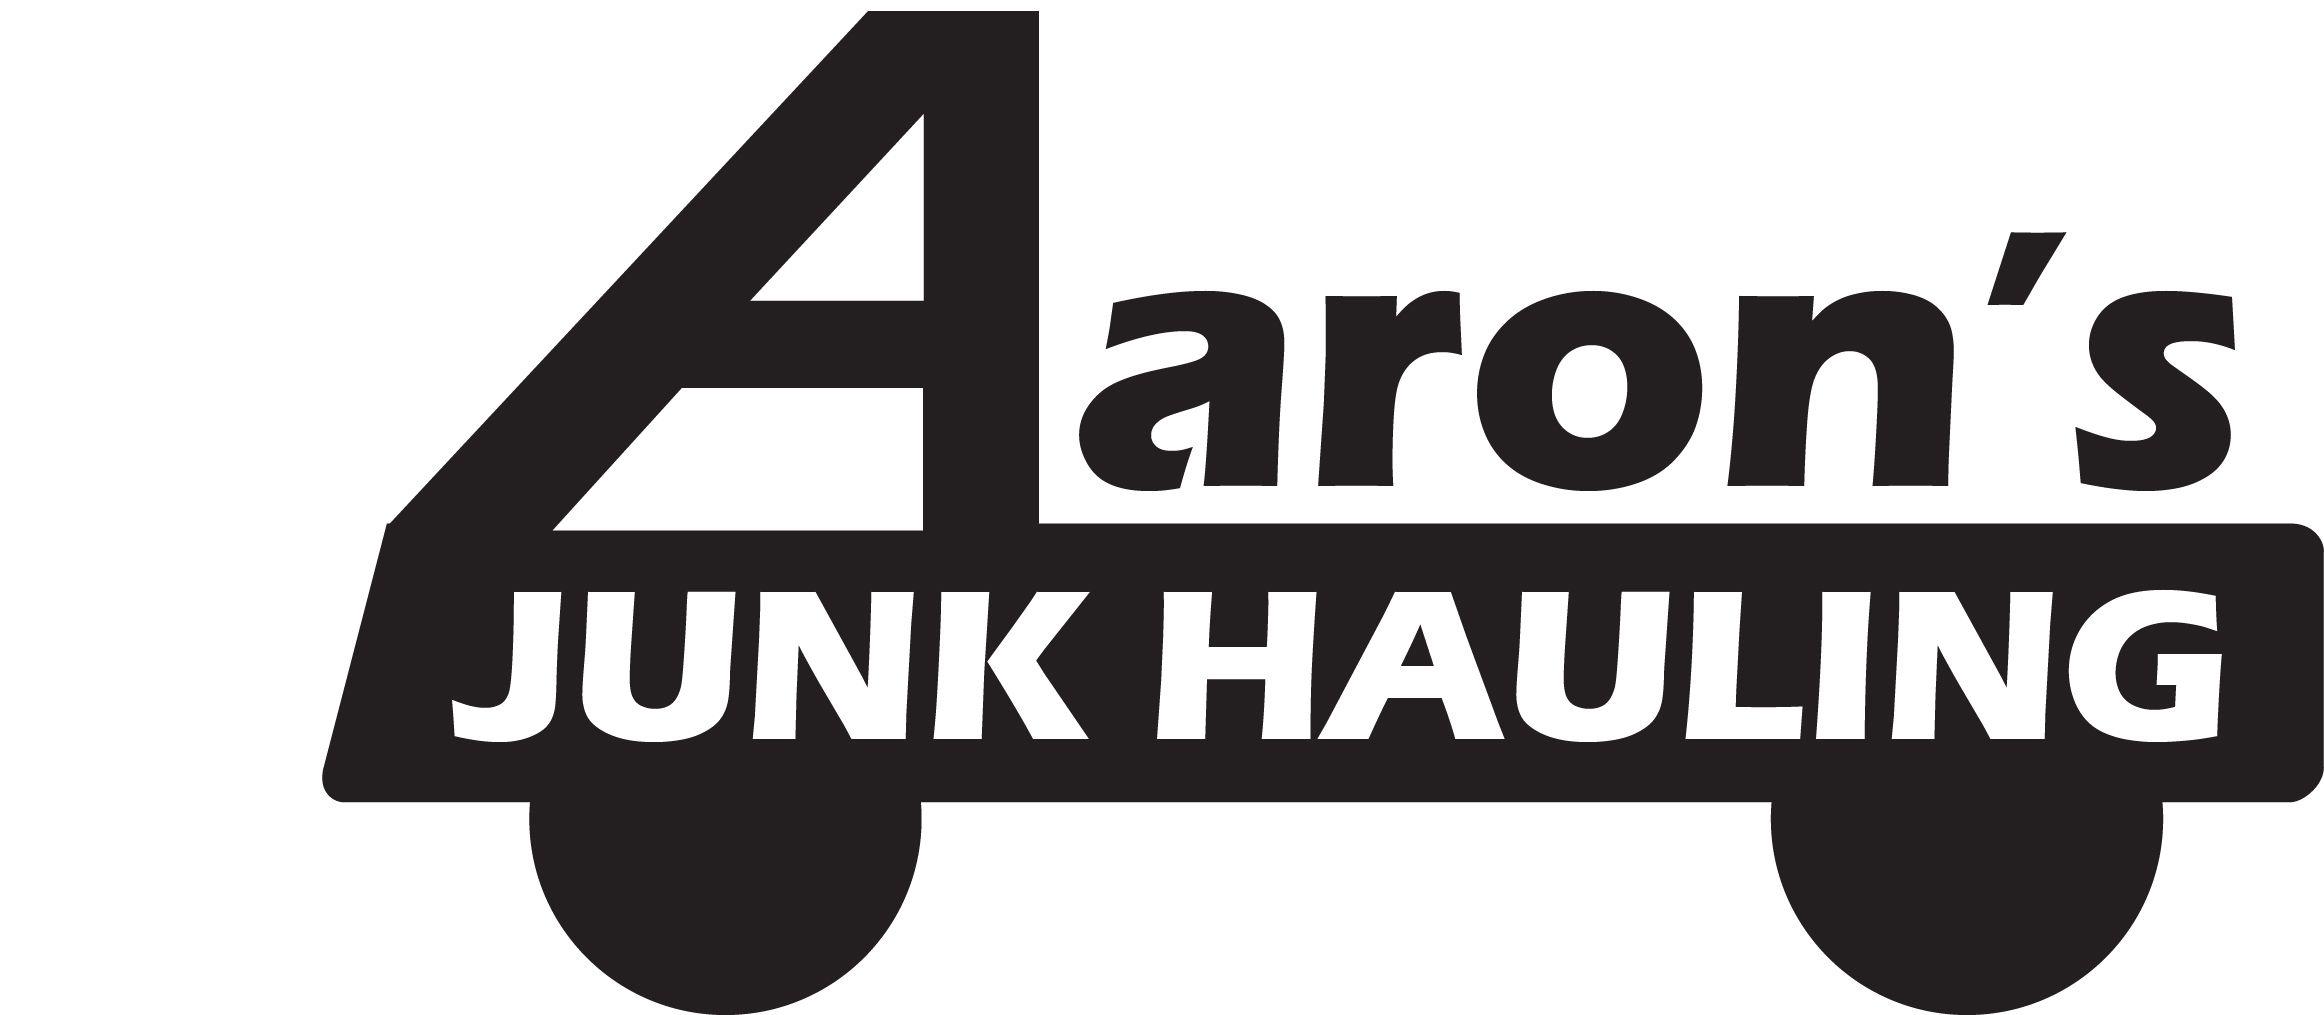 Aaron's Logo - Aarons Junk Removal Service in Denver with Trash & Waste Hauling